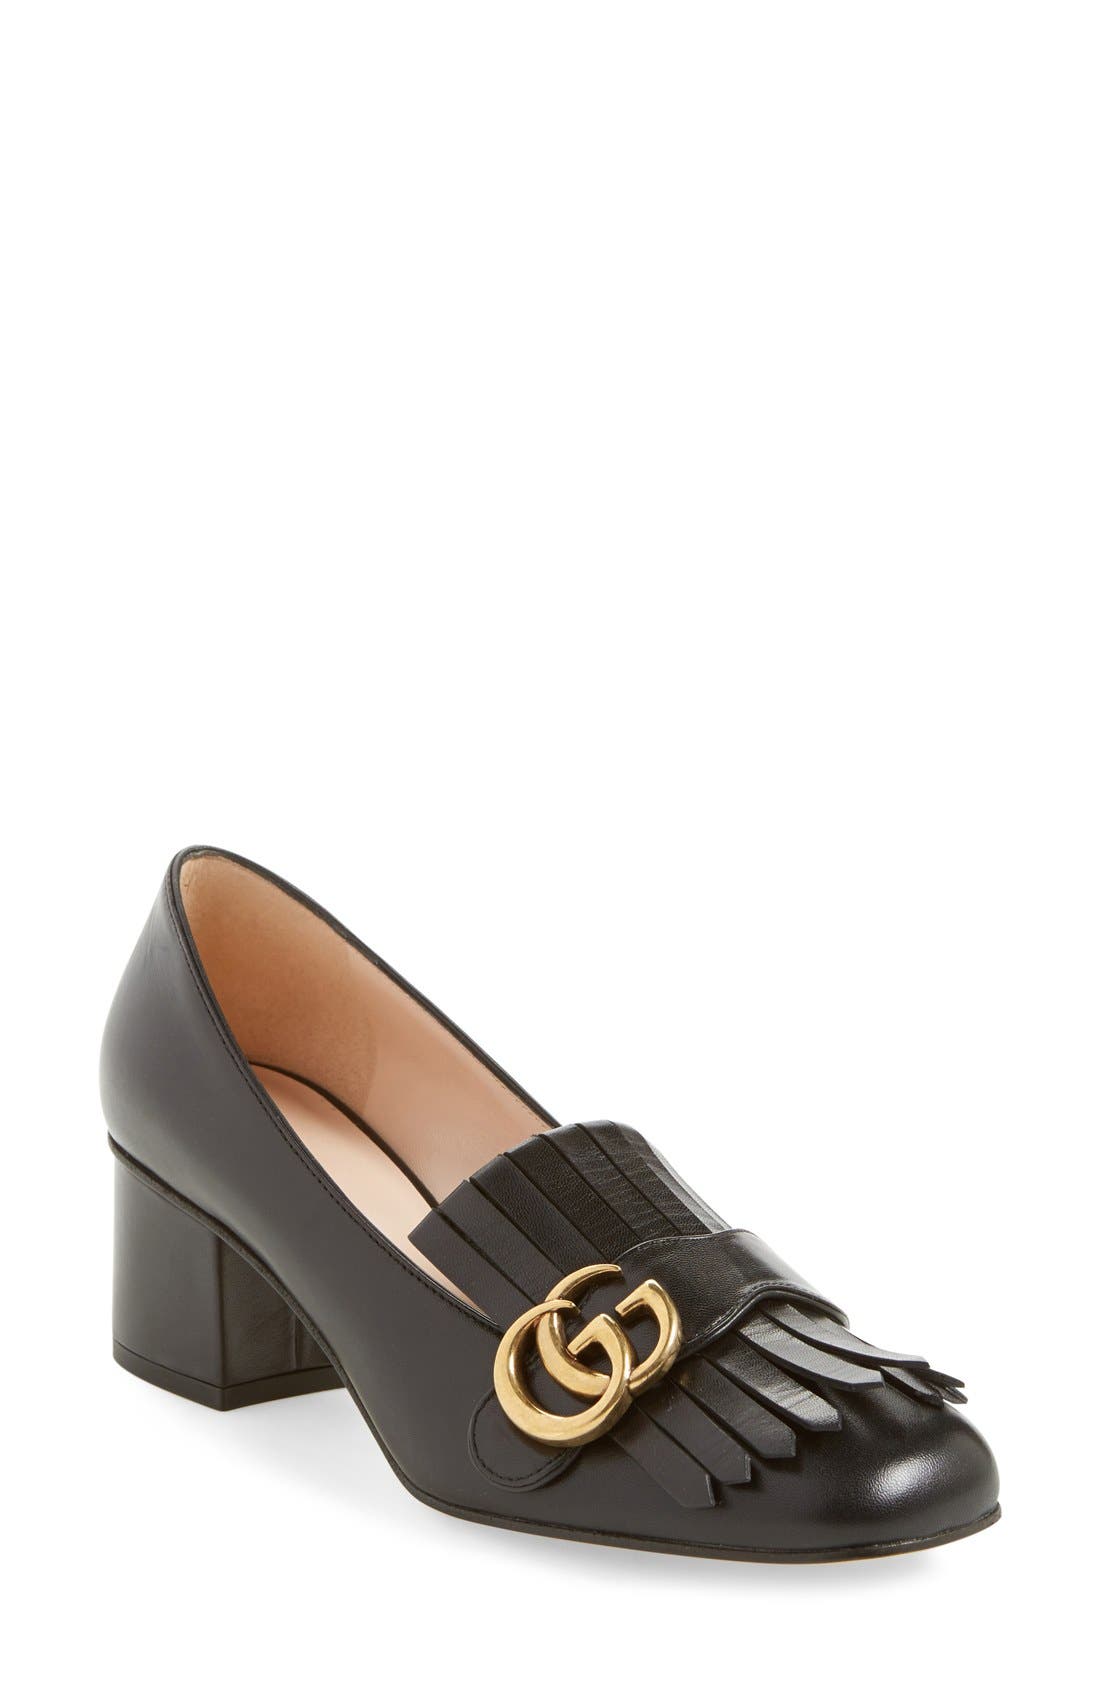 Women's Gucci Loafers \u0026 Oxfords | Nordstrom